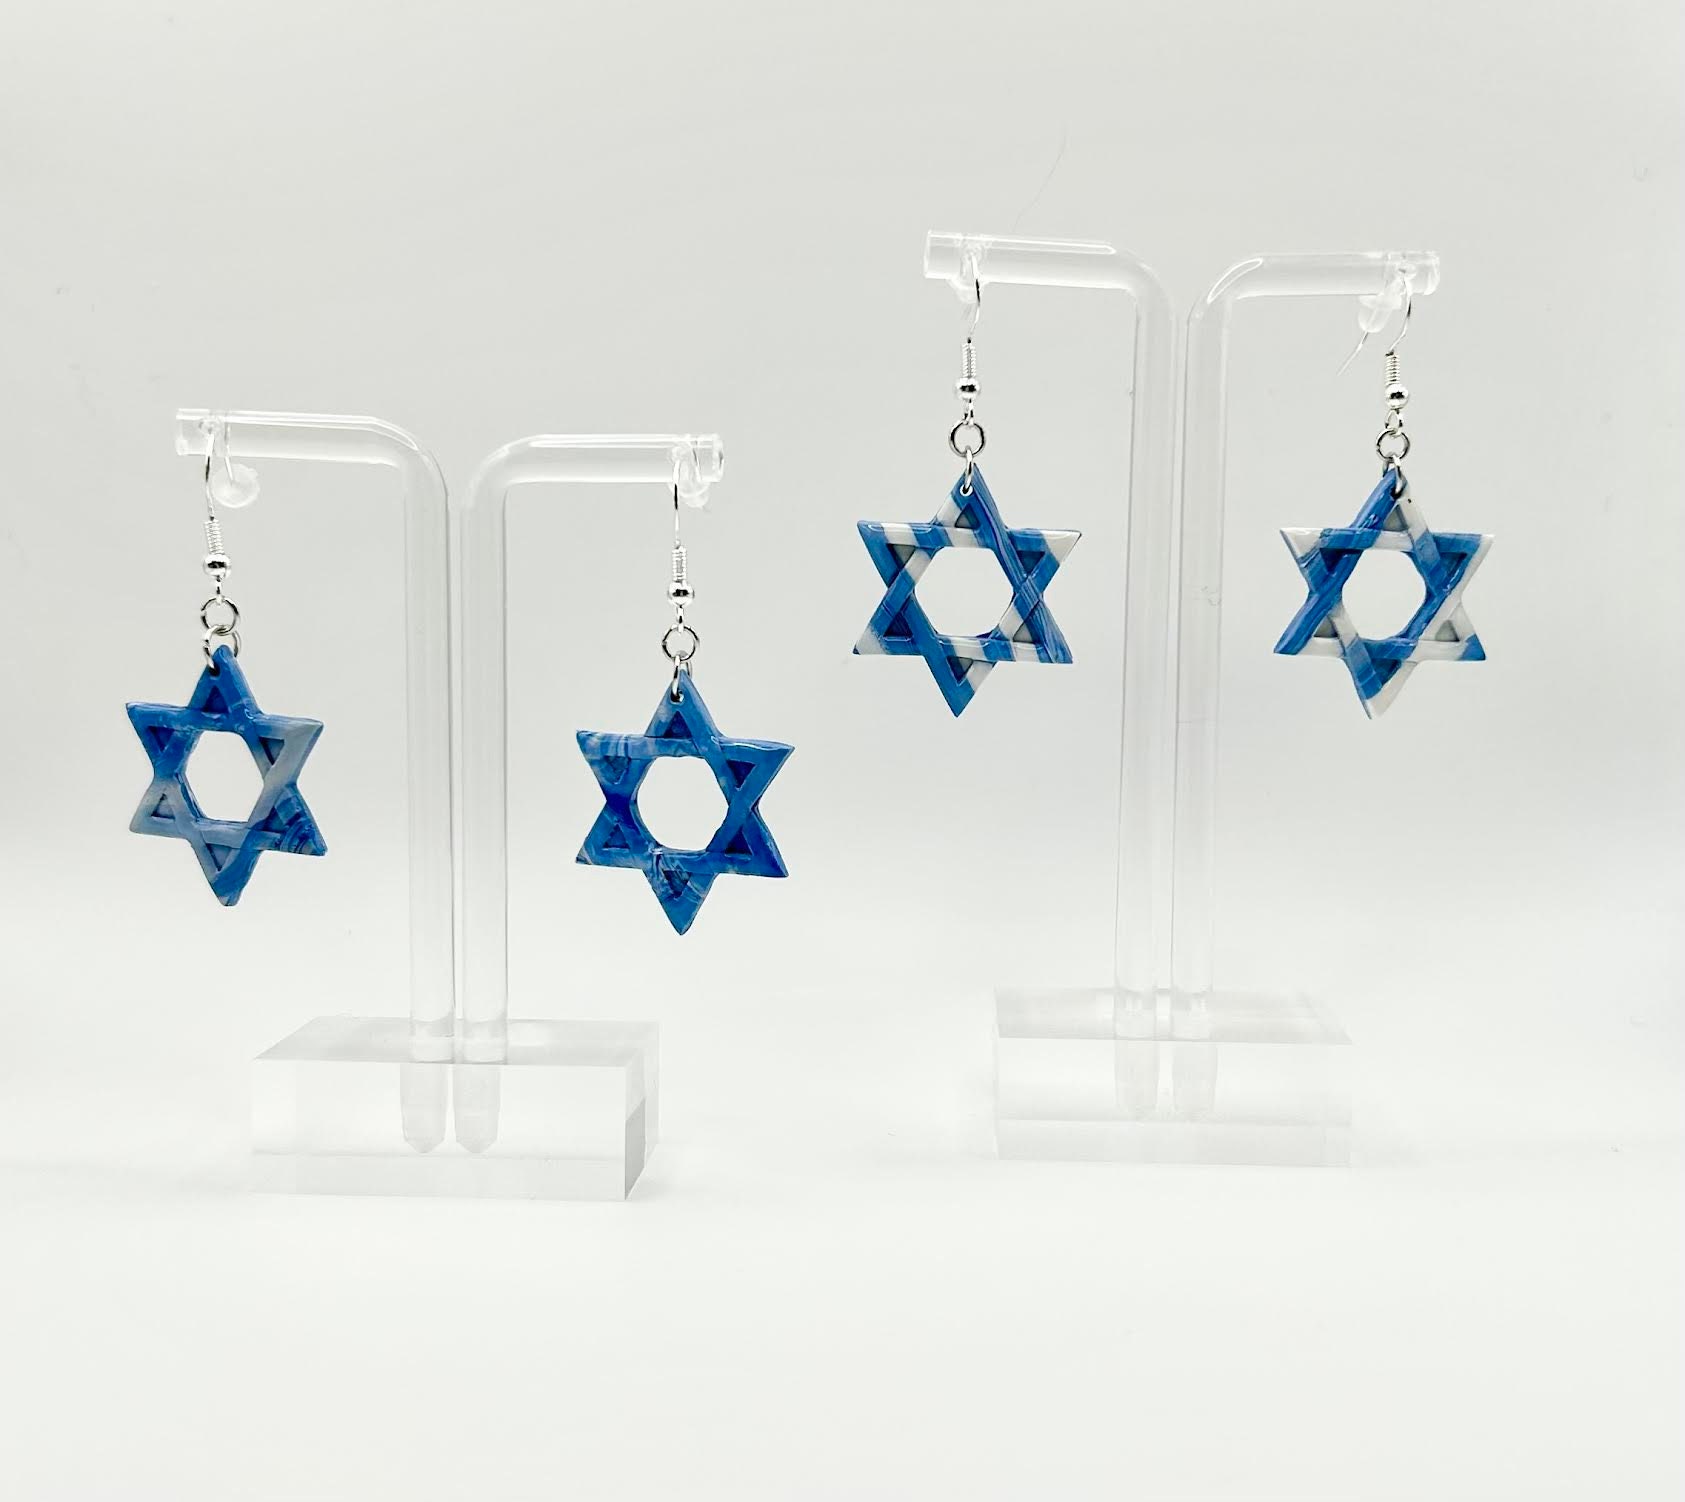 Polymer Clay Beads  at the Jewish School Supply Company